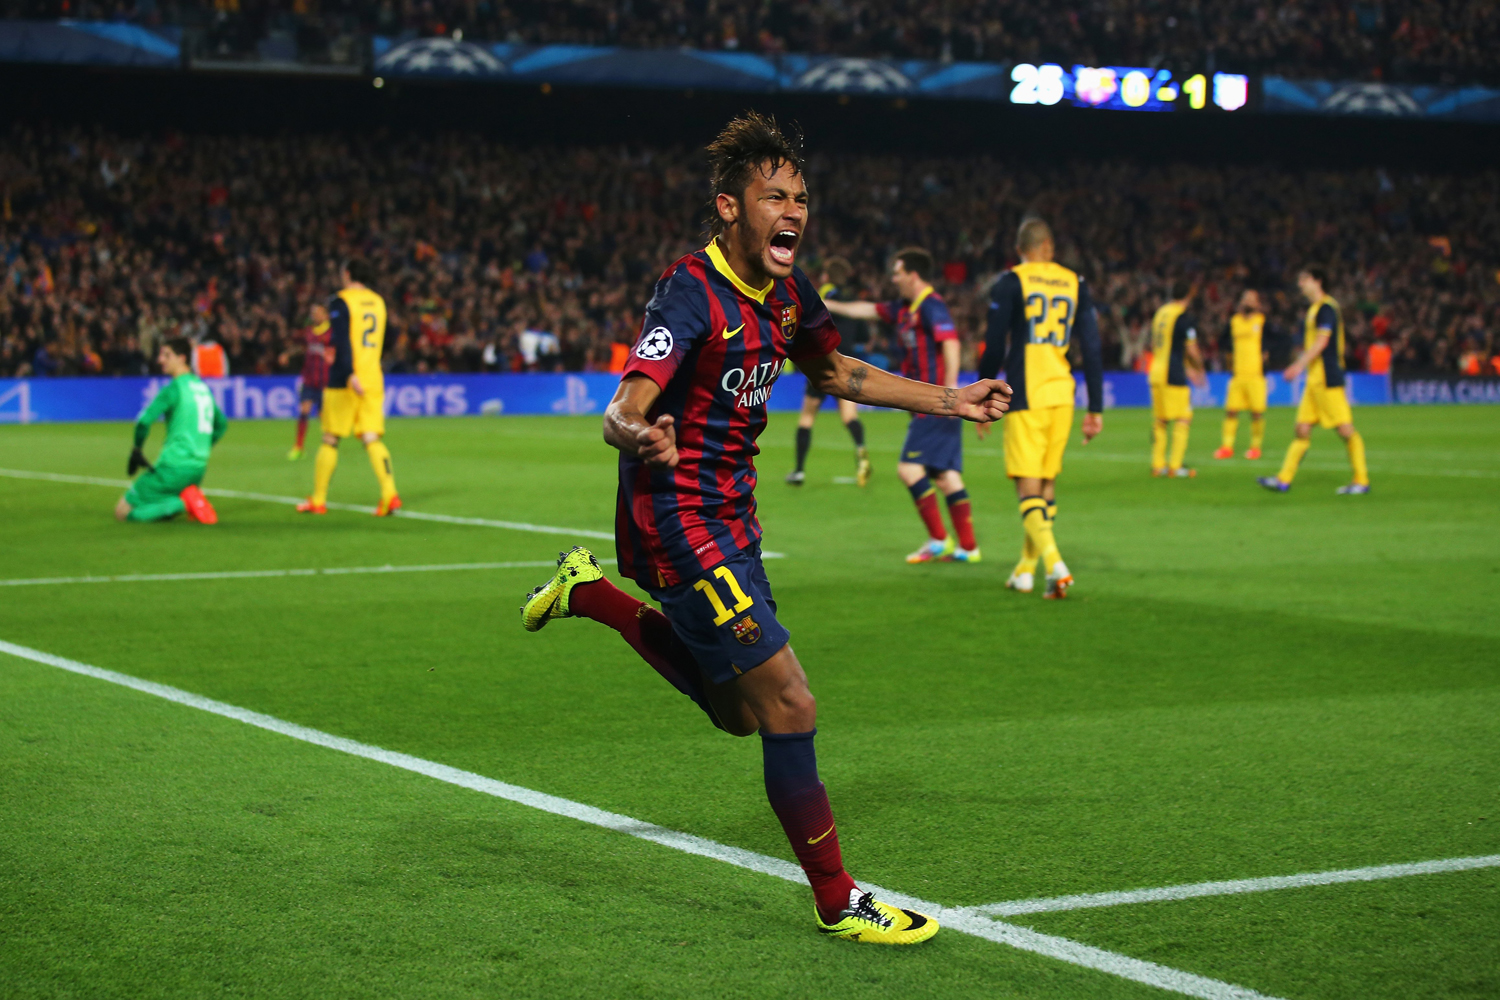 Neymar of Barcelona celebrates his goal during the UEFA Champions League Quarter Final first leg match between FC Barcelona and Club Atletico de Madrid at Camp Nou on April 1, 2014 in Barcelona.